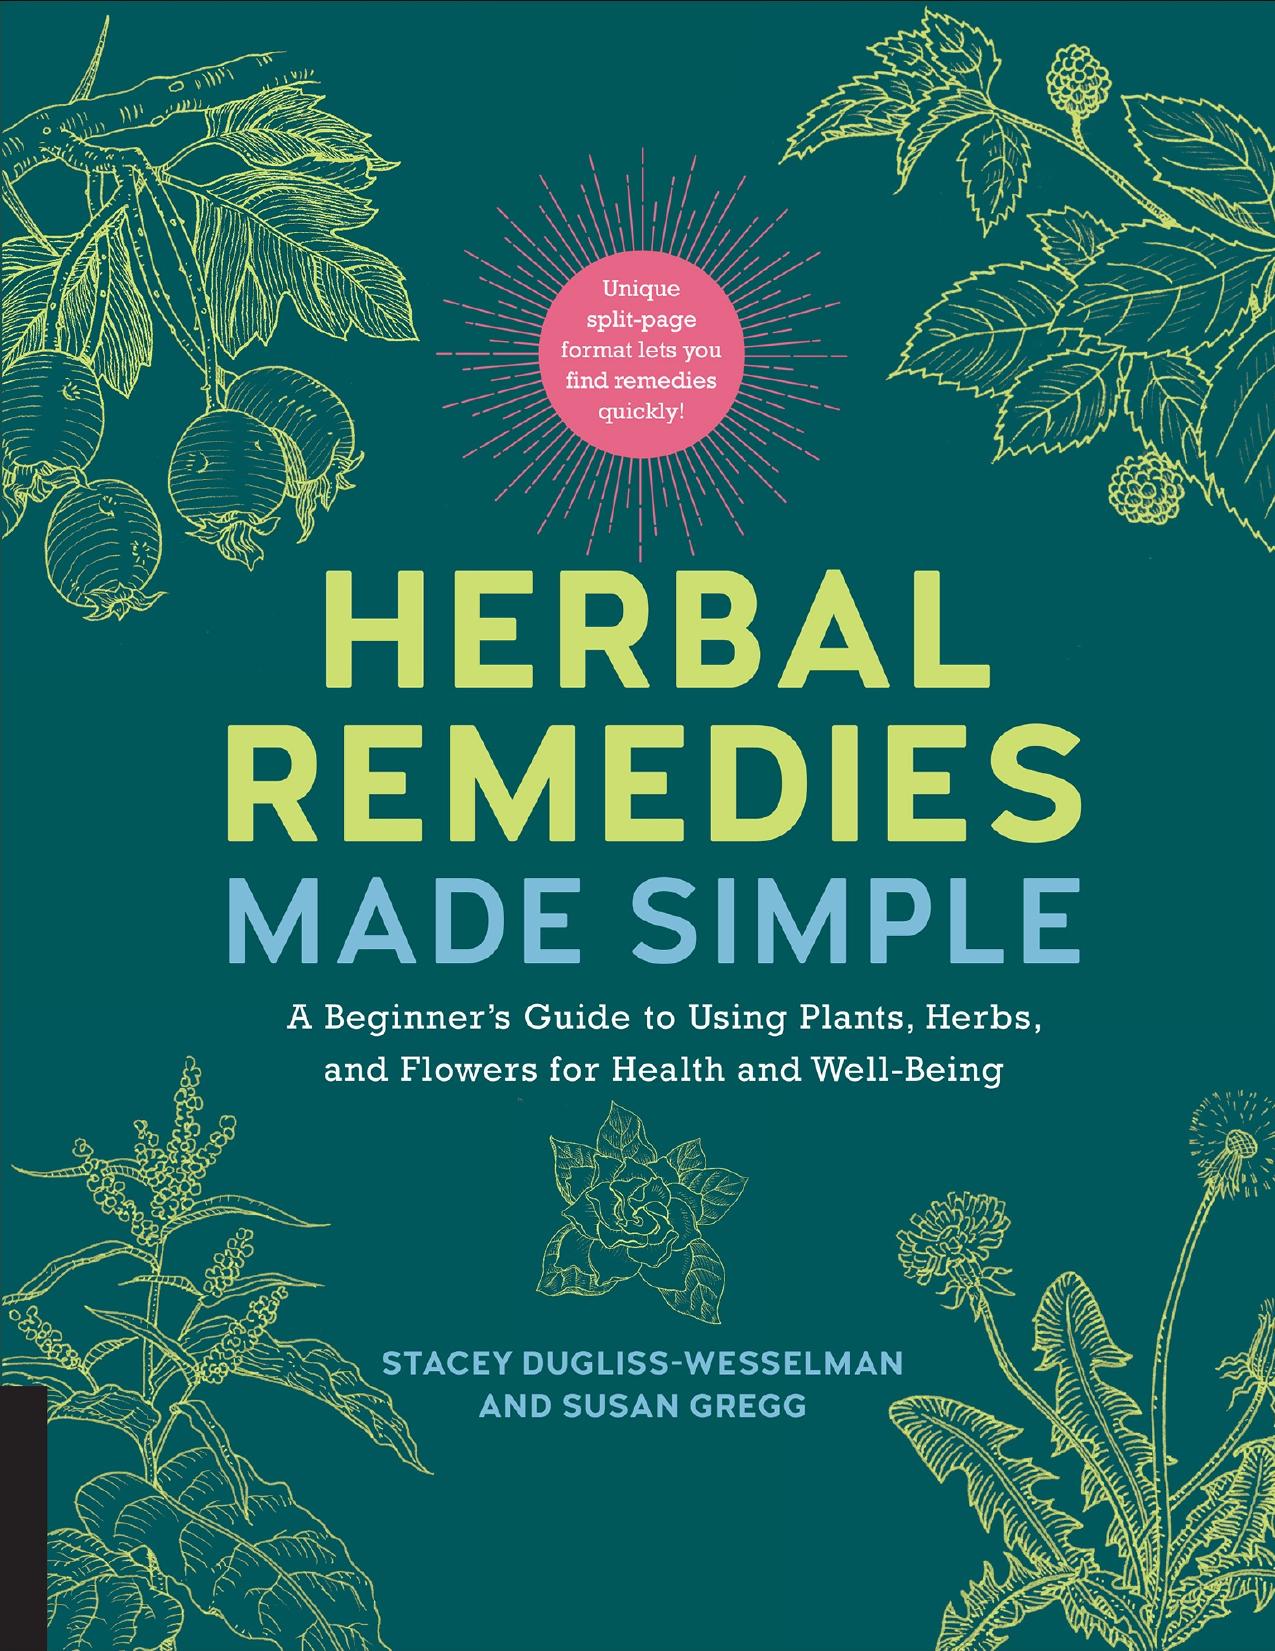 Herbal Remedies Made Simple: A Beginner’s Guide to Using Plants, Herbs, and Flowers for Health and Well-Being - PDFDrive.com